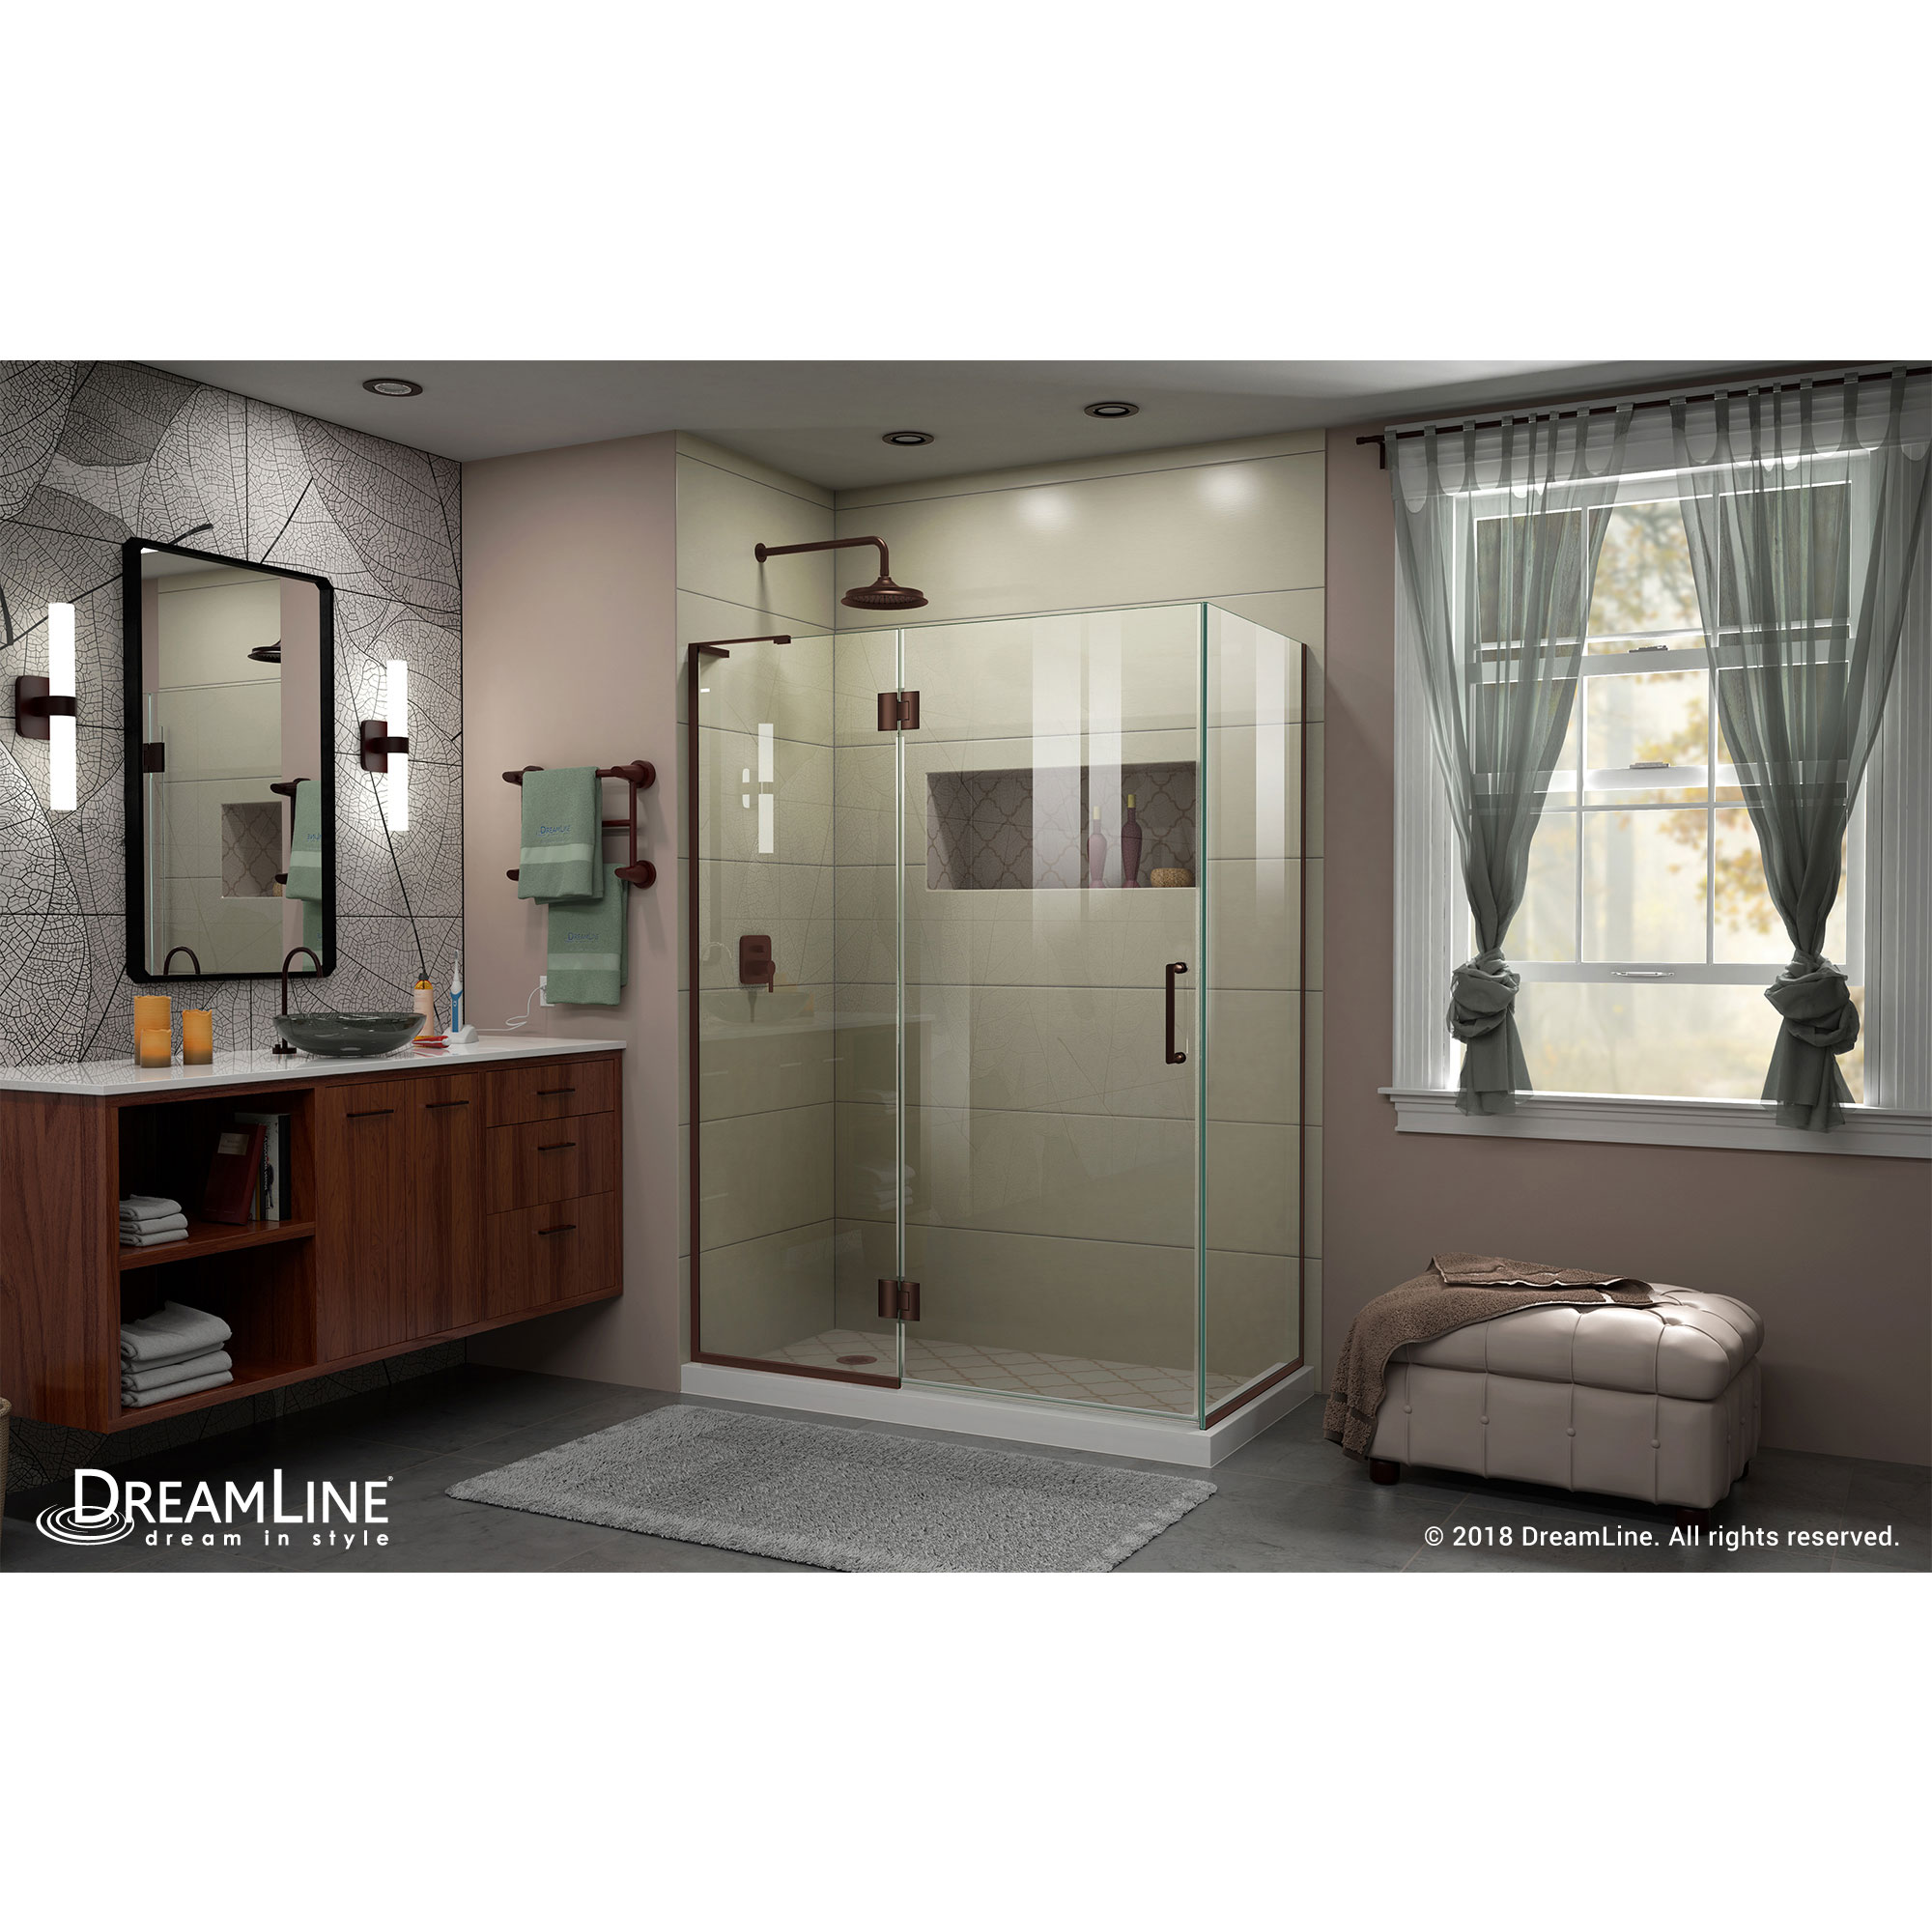 DreamLine Unidoor-X 48 3/8 in. W x 34 in. D x 72 in. H Frameless Hinged Shower Enclosure in Oil Rubbed Bronze